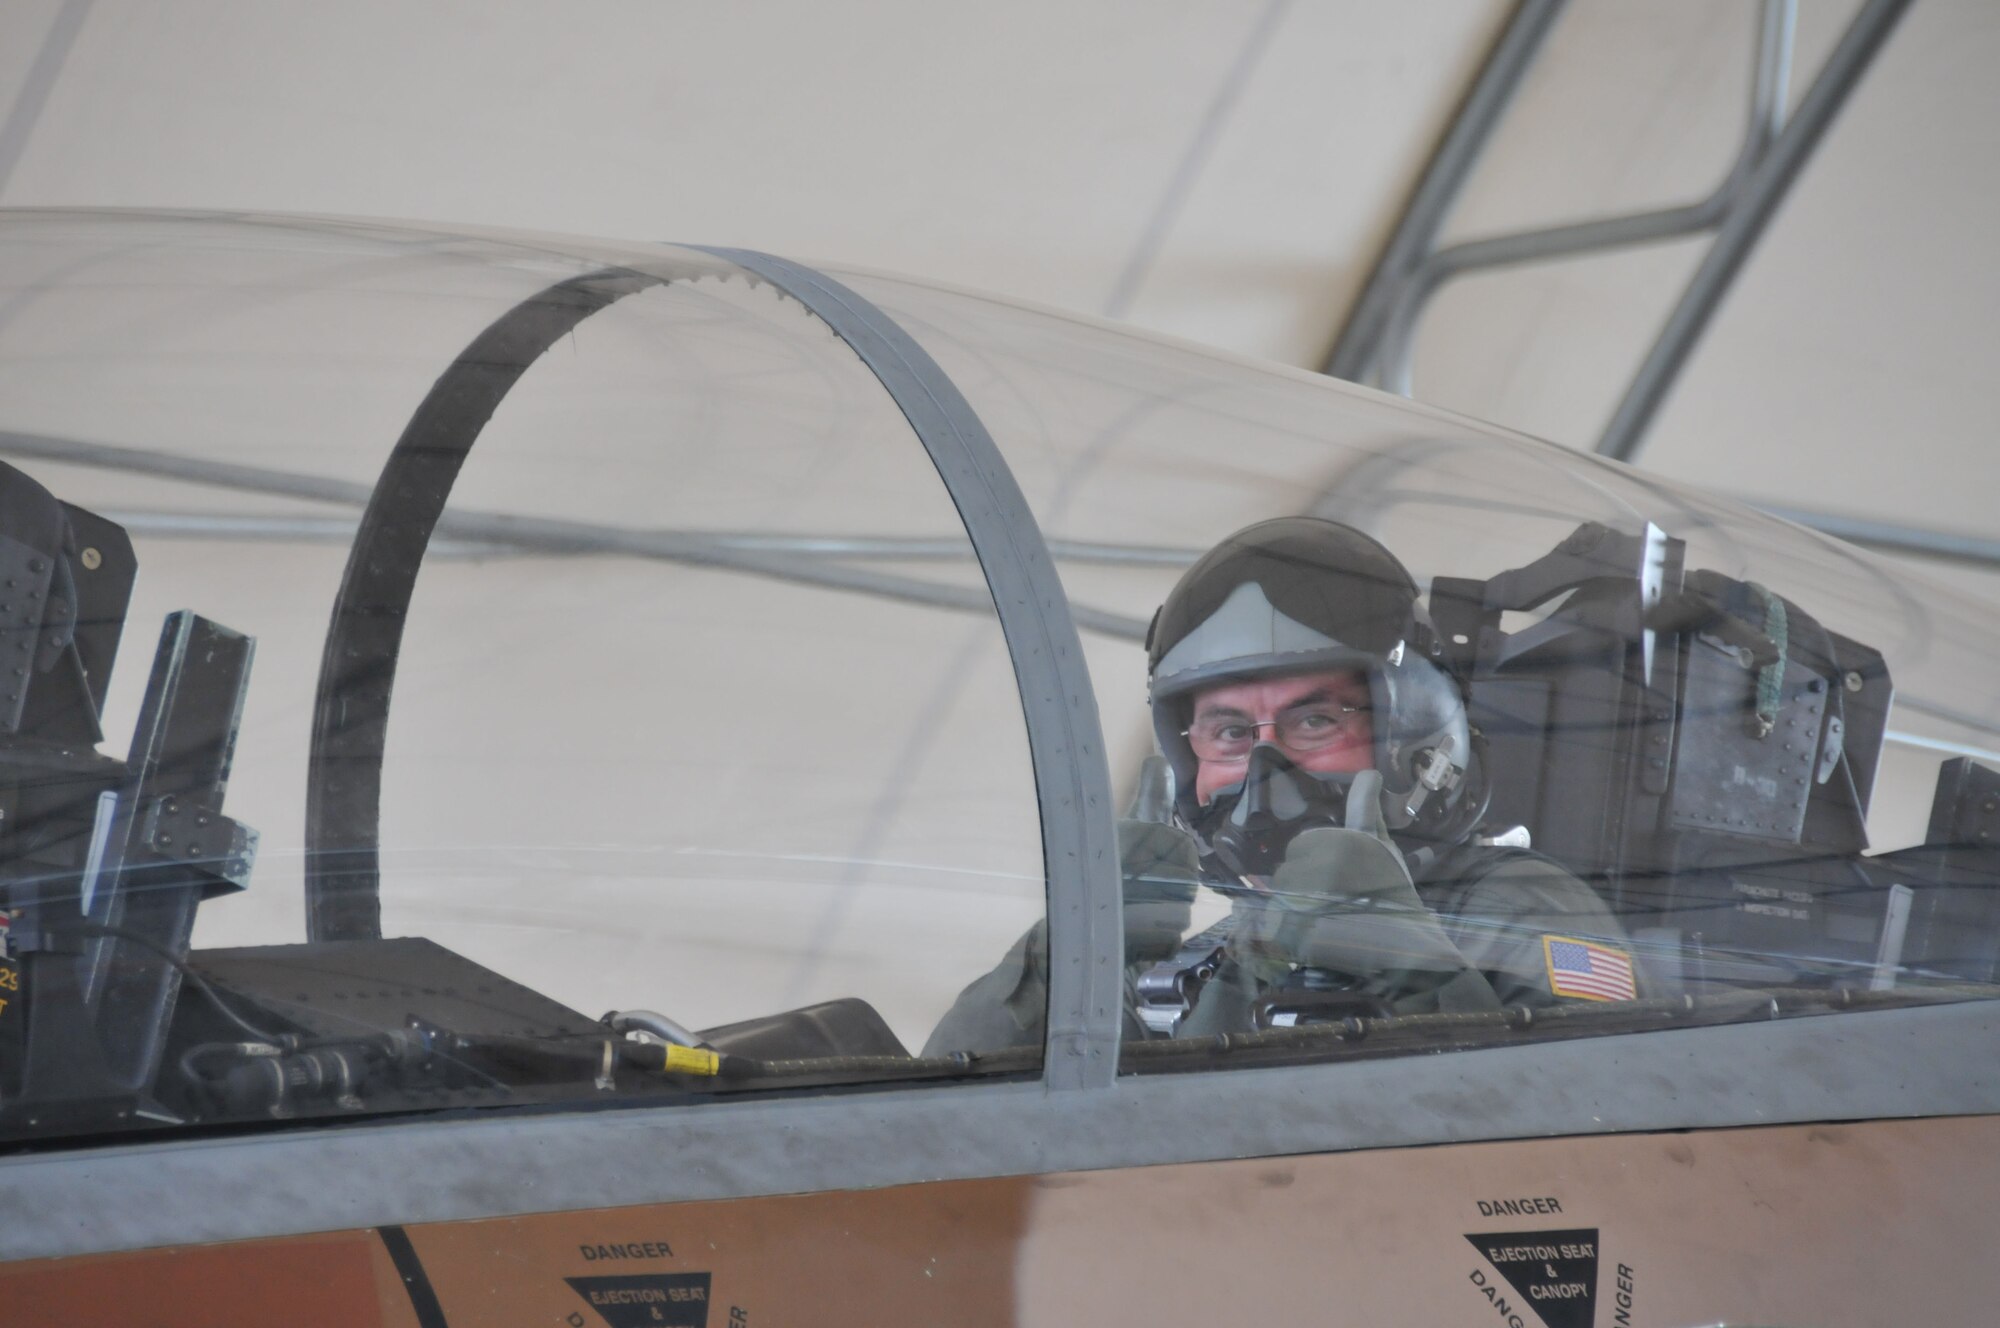 Tech. Sgt. Don Kirby gives his "two thumbs up" prior to taxiing to the runway.